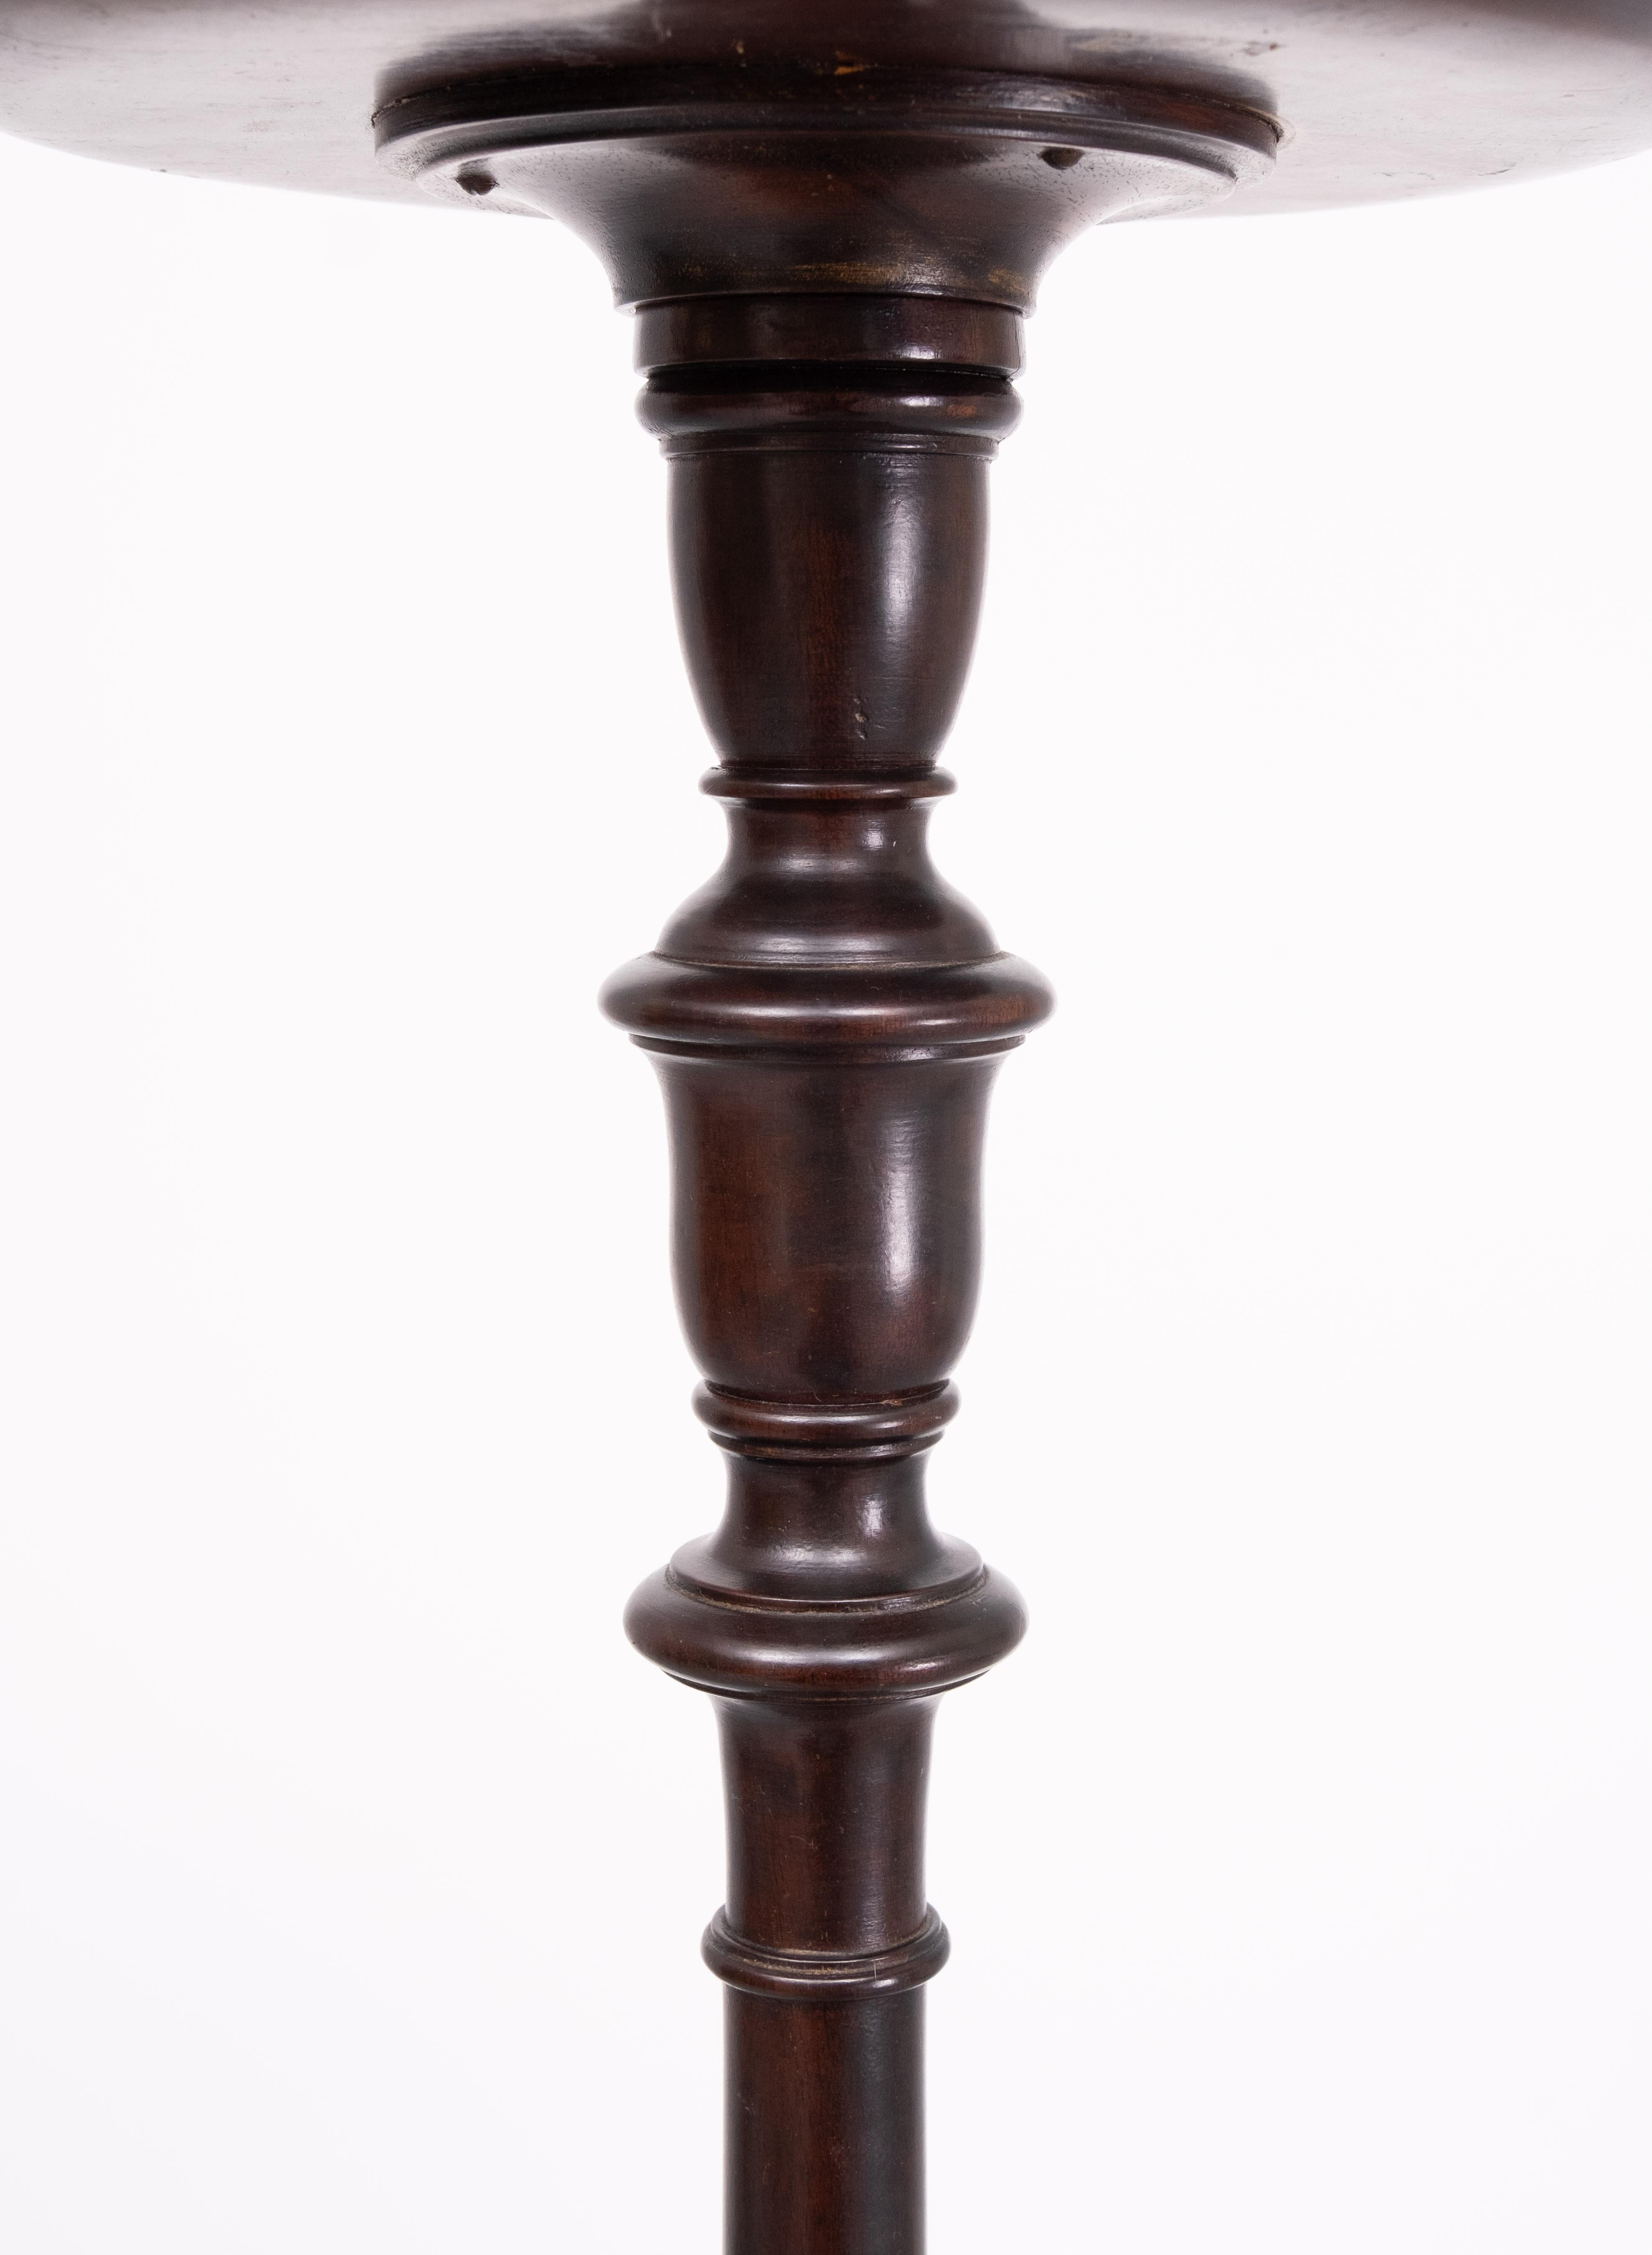 Beautiful tall Antique Torchere stand. solid Mahogany .
Especial for Oil lamps because its height . Very nice elegant model .
Very good condition. 
